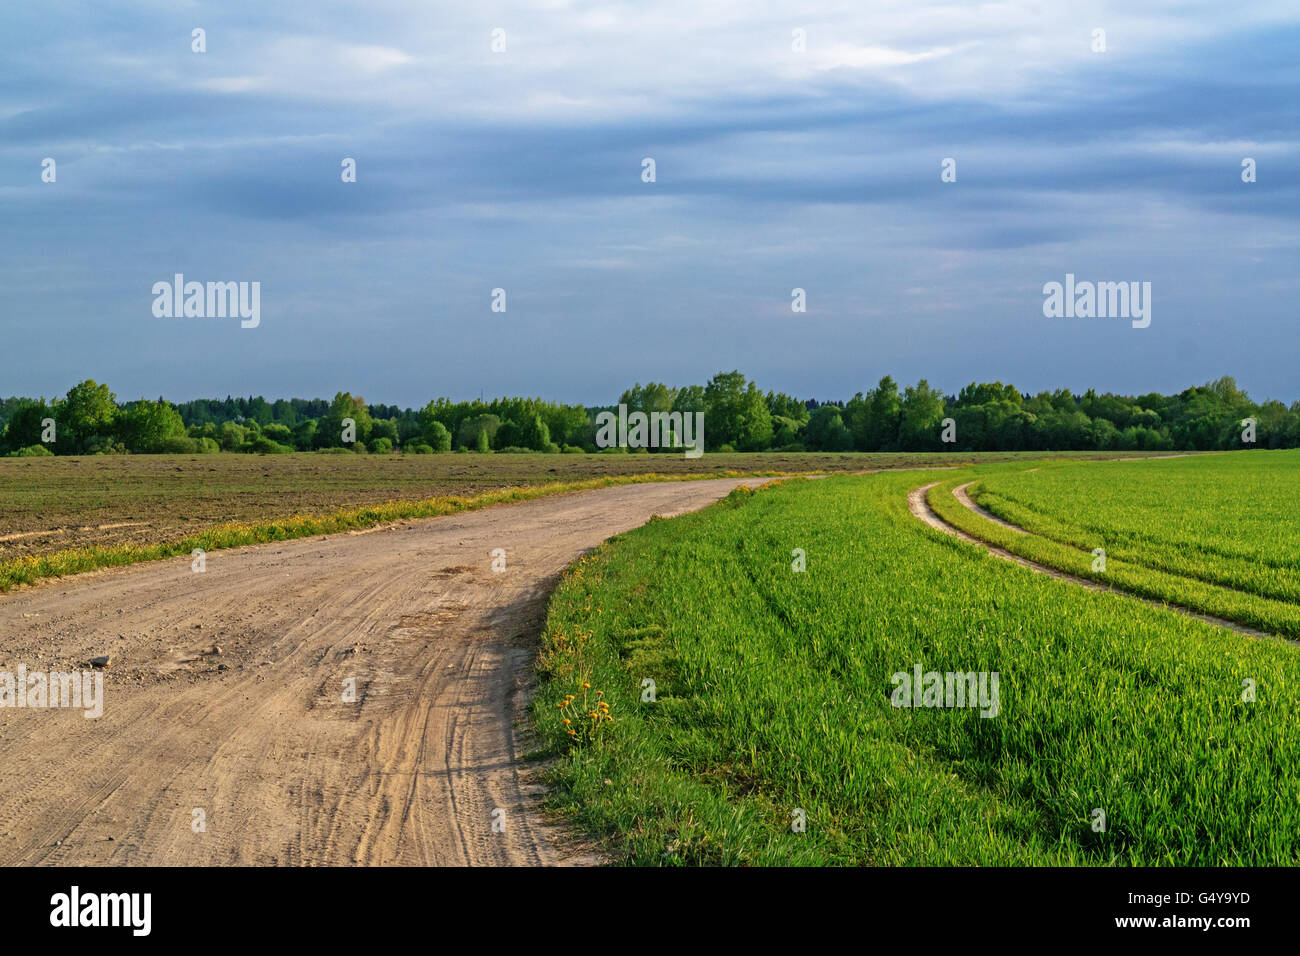 Ground road through agricultural fields.Along the road plowed brown field and green grain fields. Stock Photo